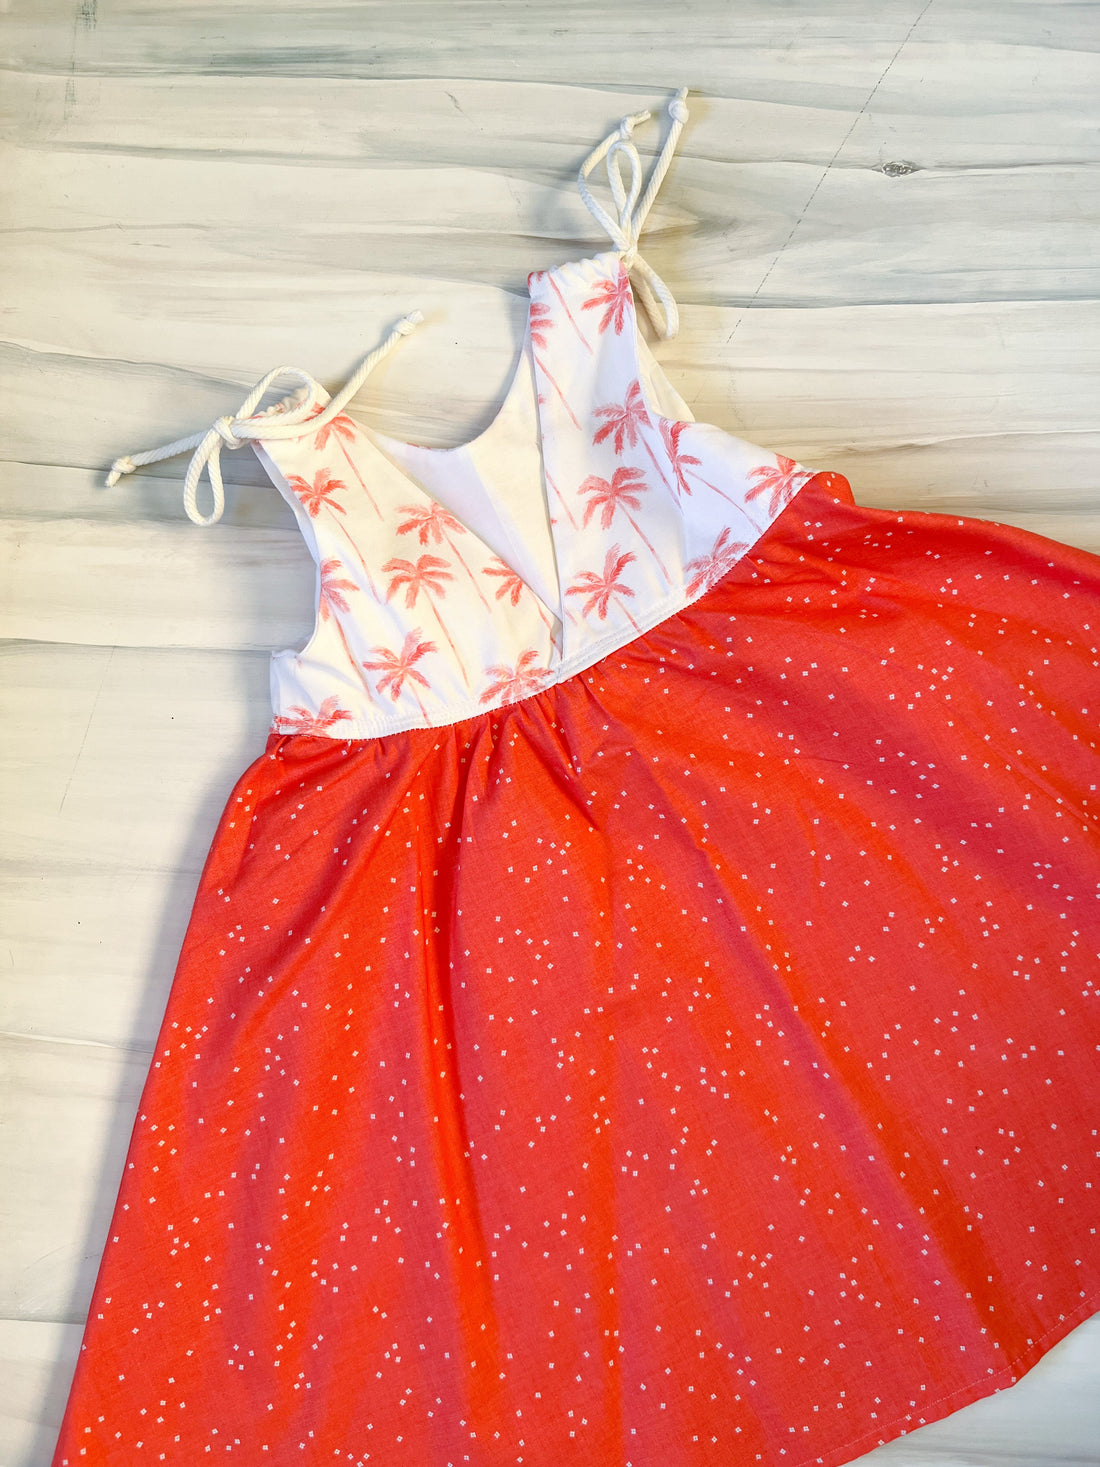 SAMPLE SALE - Specialty Girl's Dress - Size 2/3 yrs.